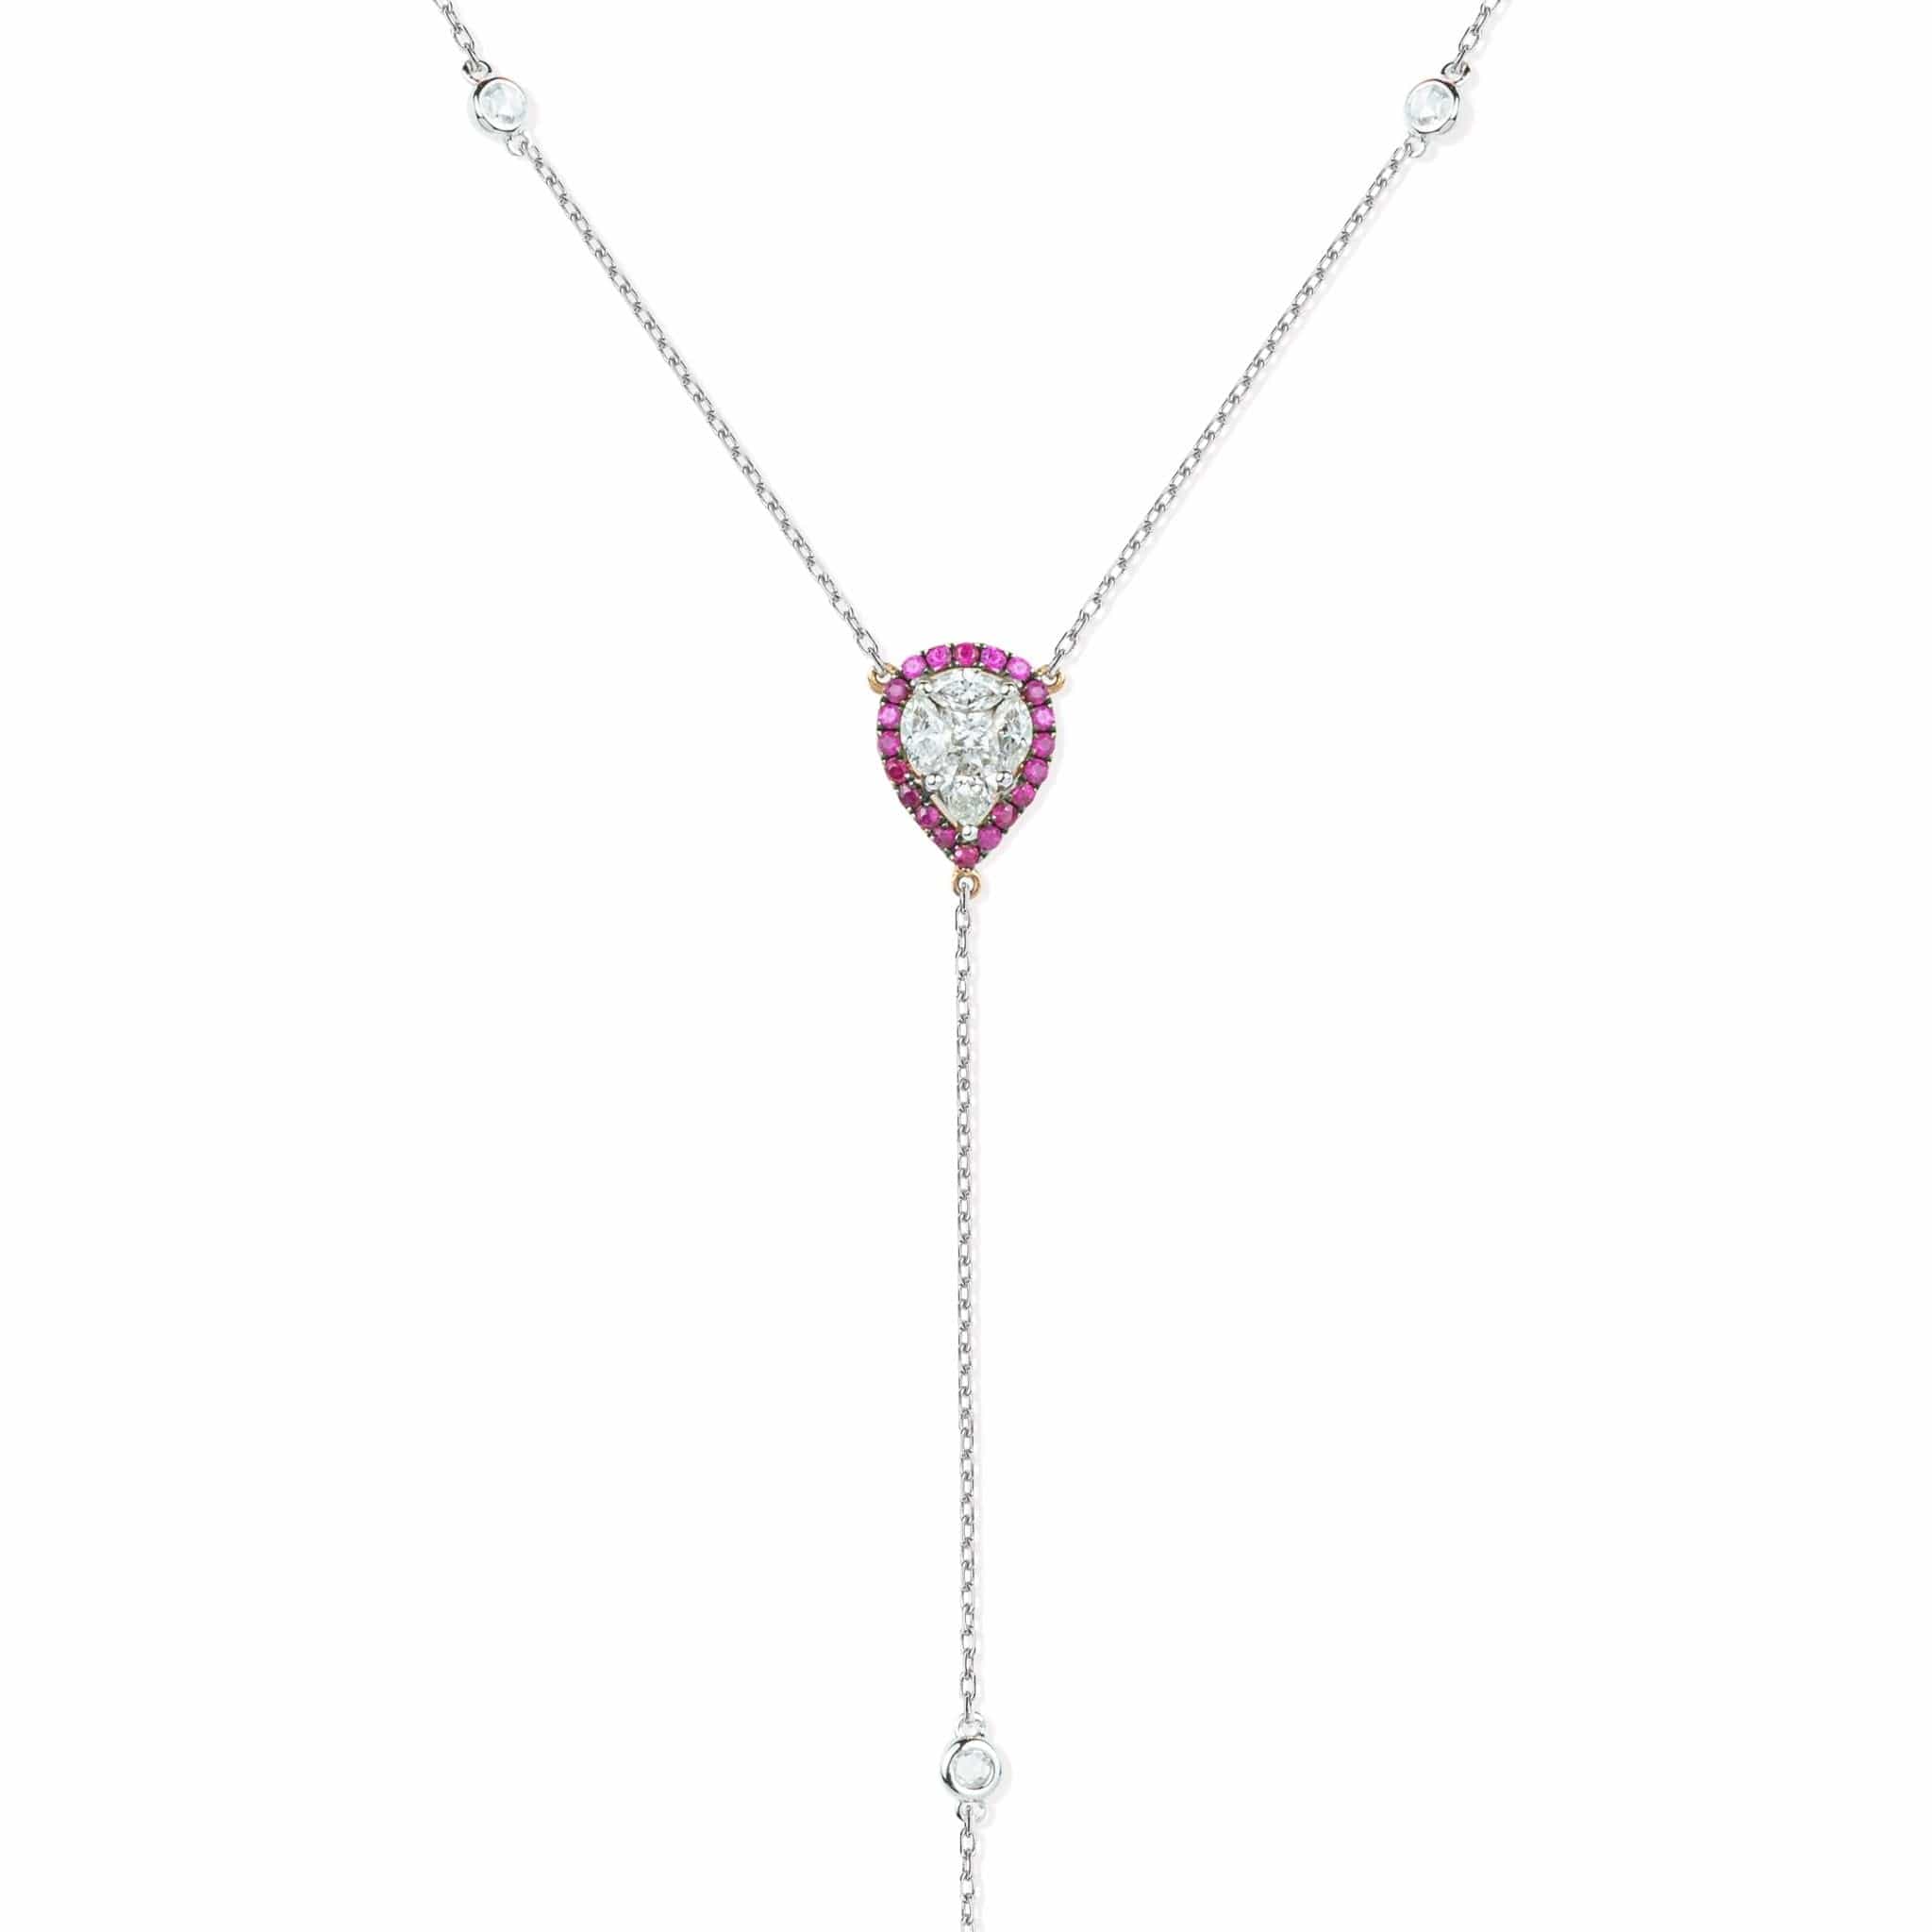 M.Fitaihi Timeless Baguette - White Gold and Diamond Pendant With Ruby - M.Fitaihi